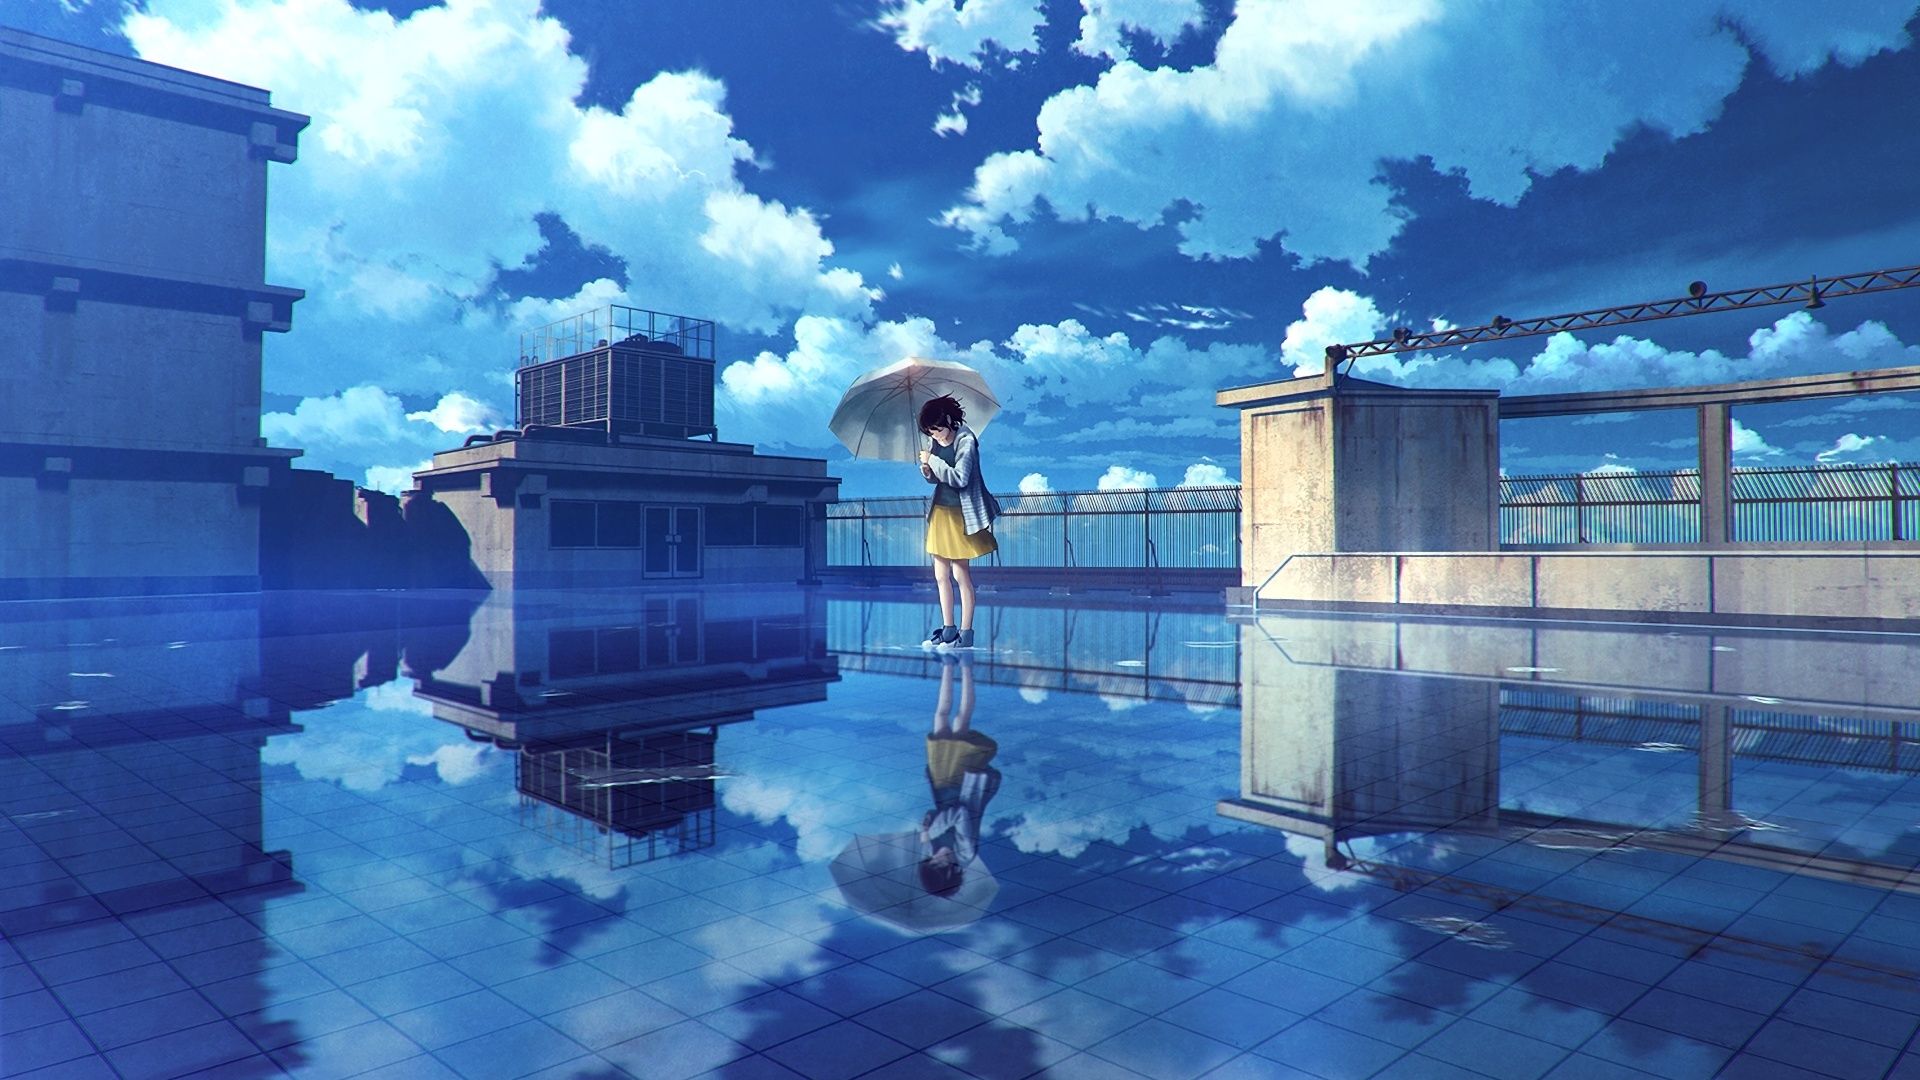 Download 1920x1080 wallpaper water, reflections, anime girl